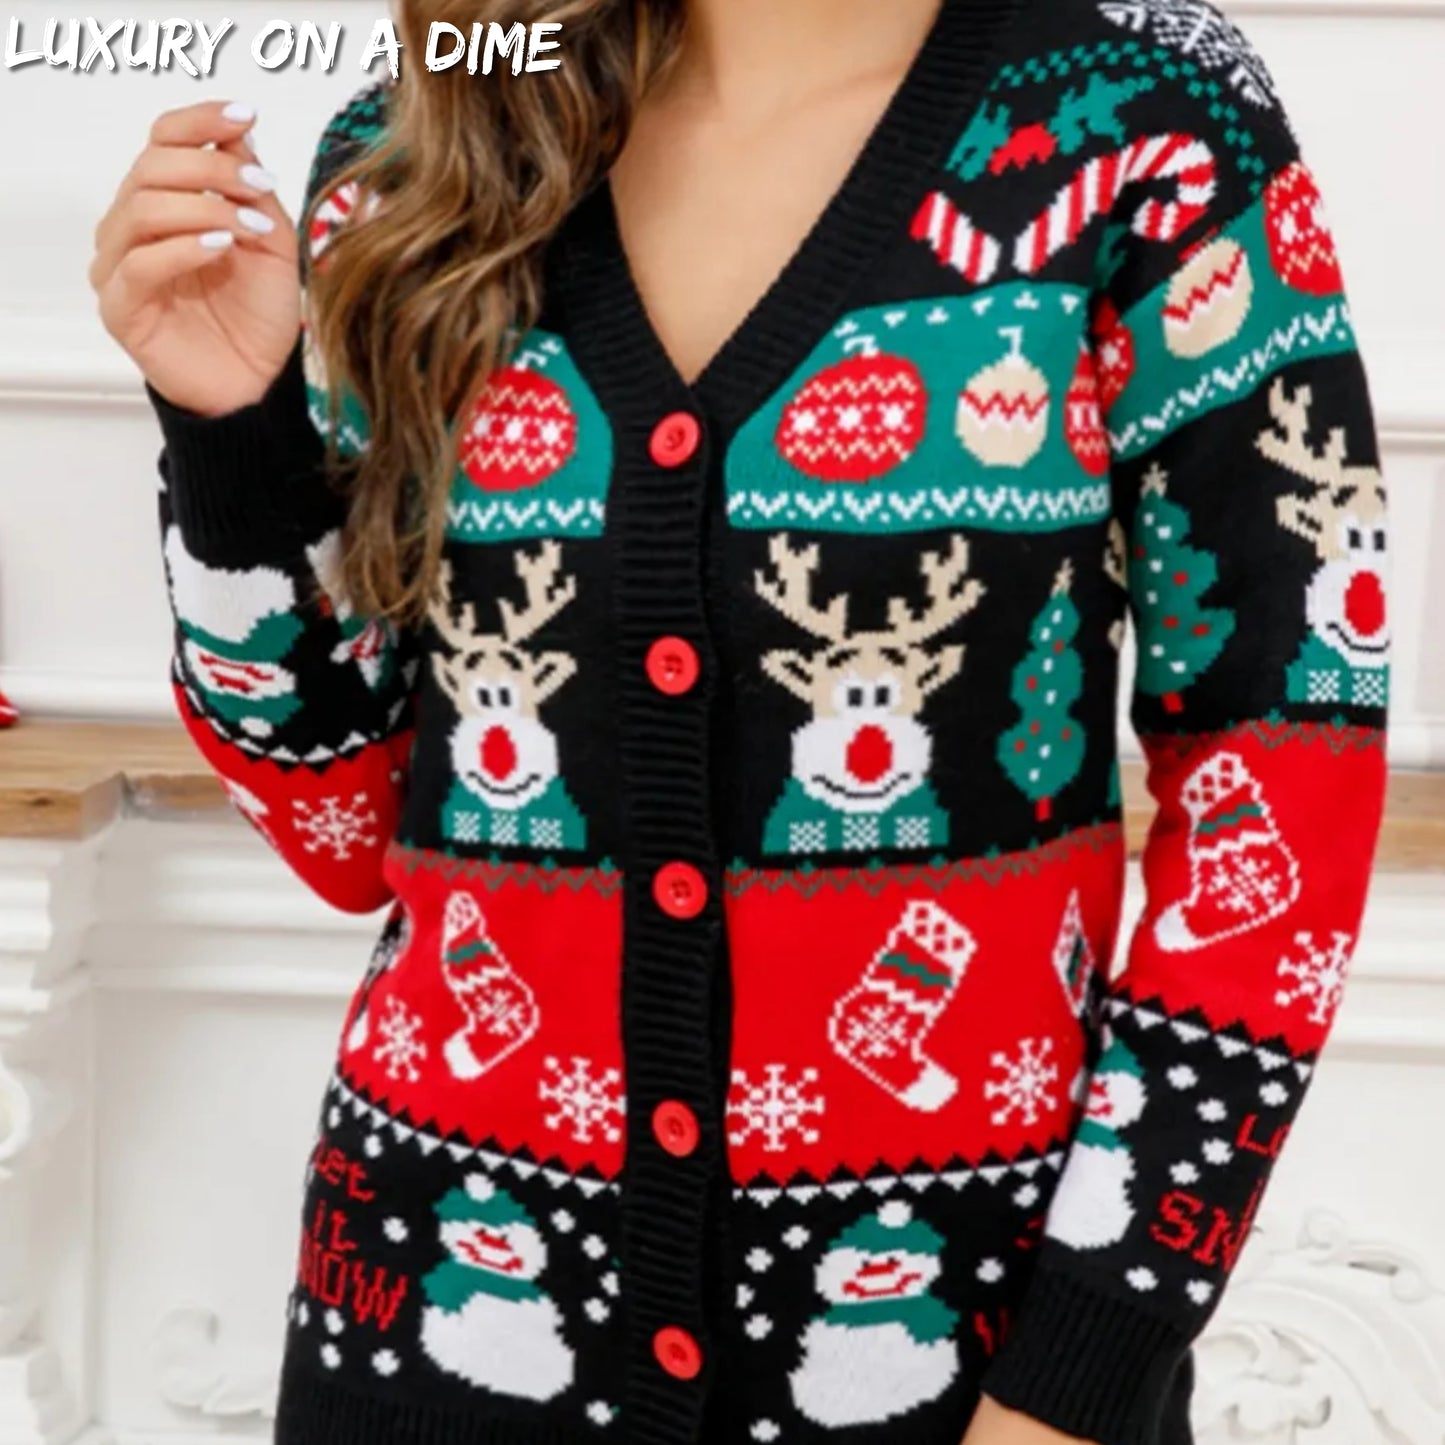 Christmas Let it Snow Long Sleeve Button Fun Colorful Knit Sweater Cardigan